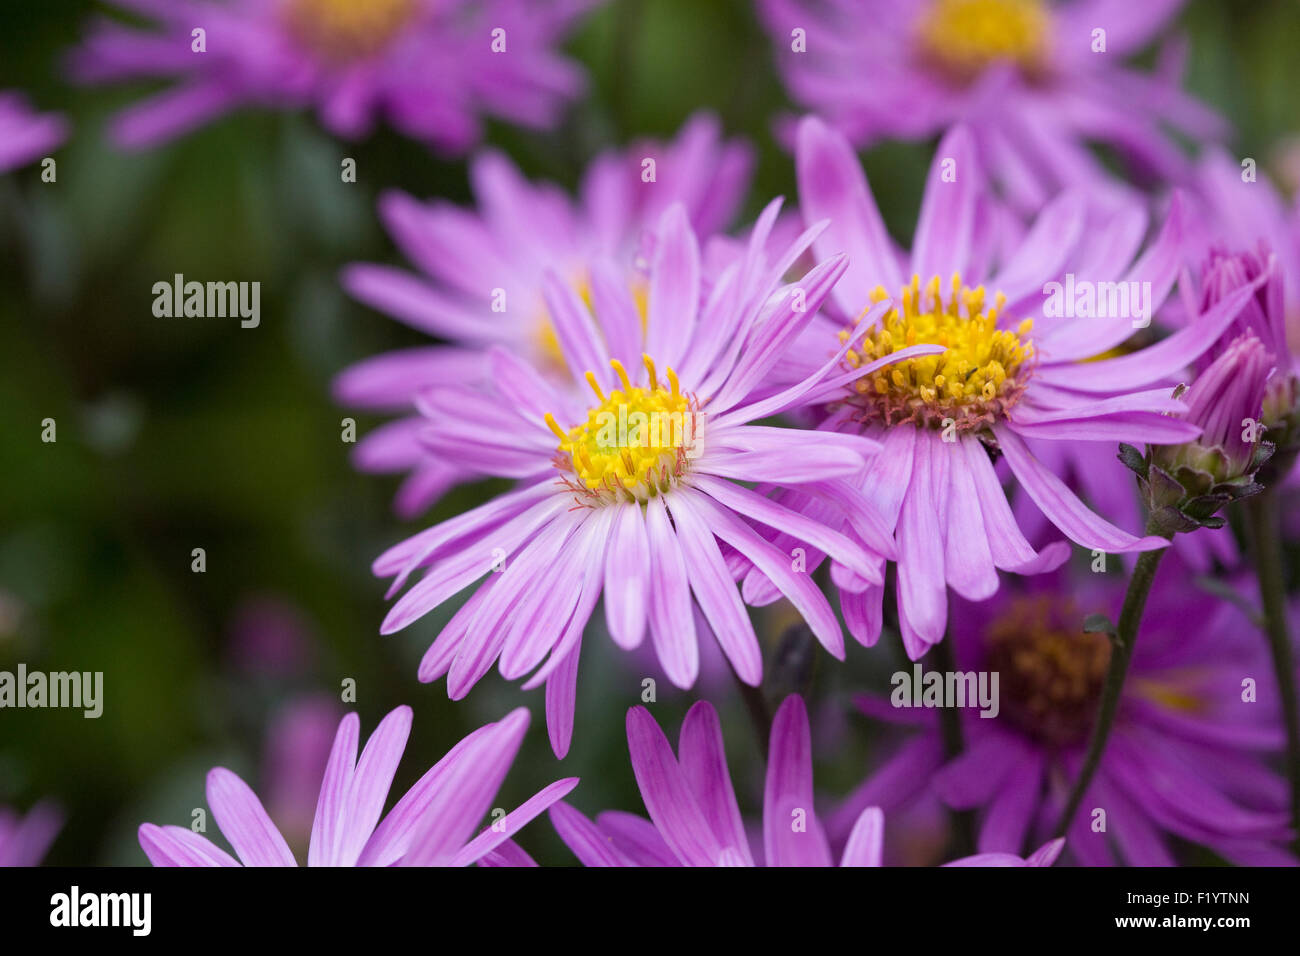 Aster amellus 'Brilliant' in an herbaceous border. Stock Photo